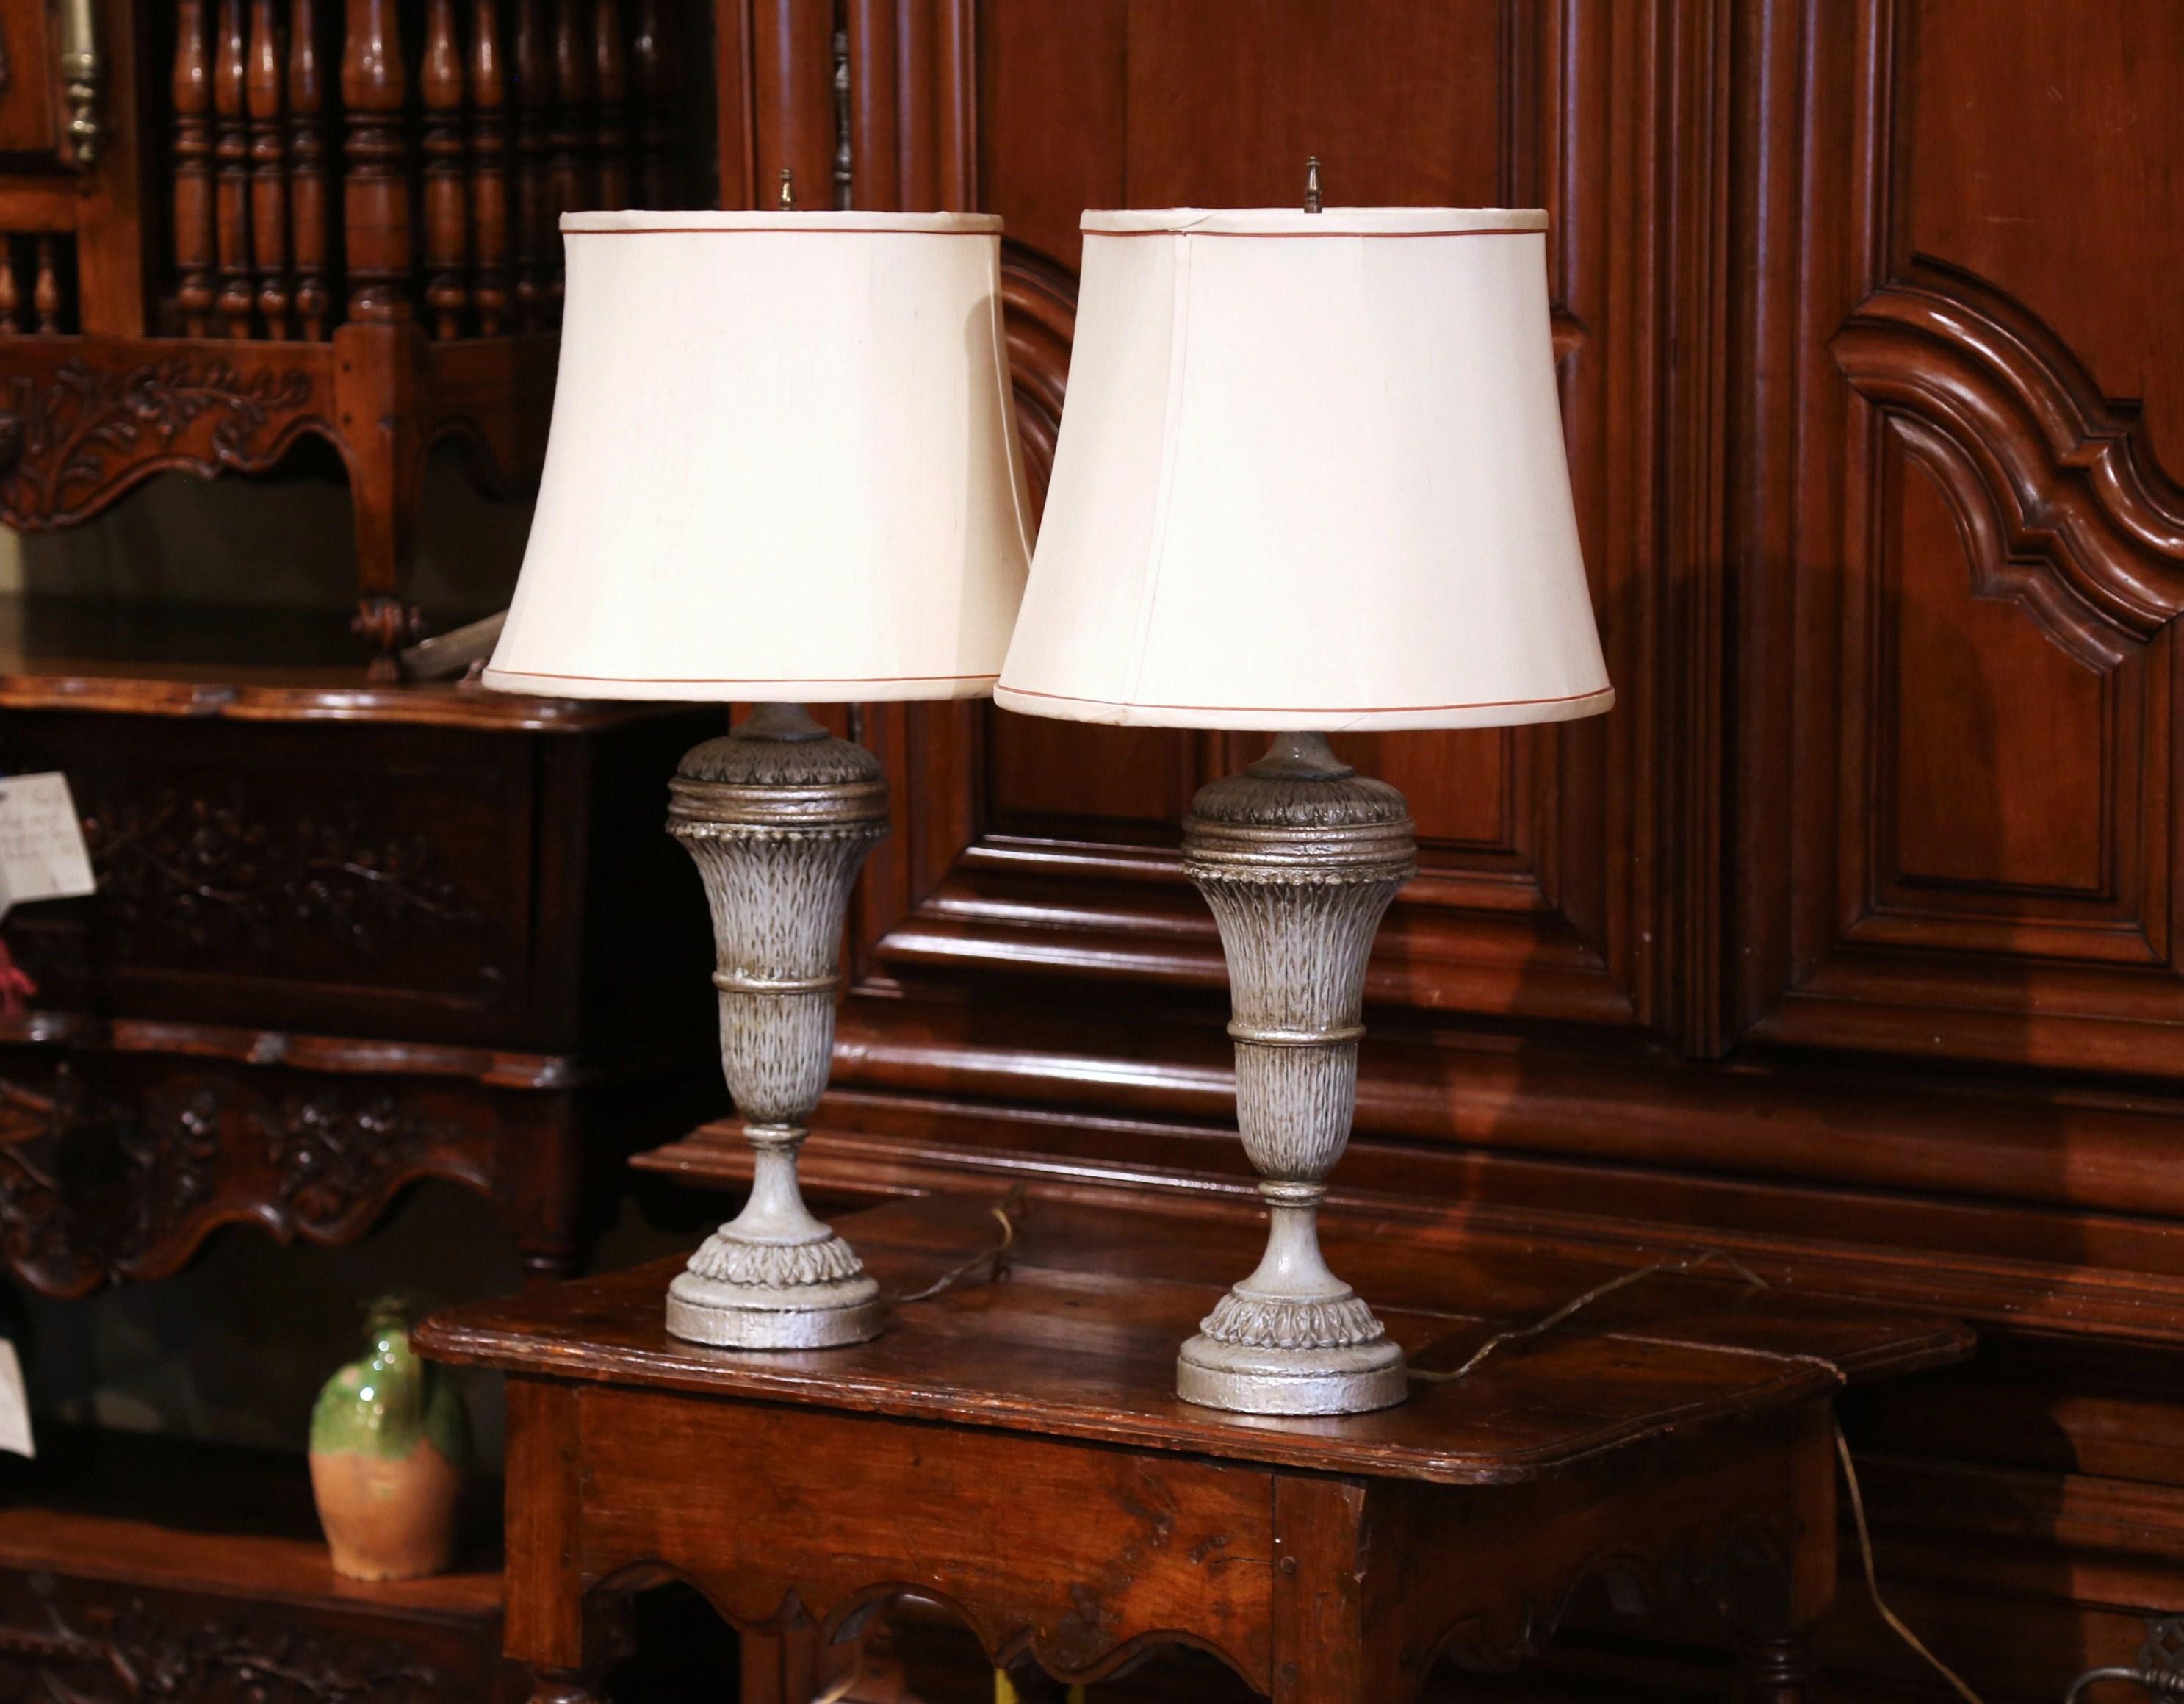 Crafted in France, circa 1890, these antique lamps would make a nice addition to your bedsides tables or entry buffet. Each lamp has a carved urn-shaped base, brass fitting, and a hand-painted finish in a green and silver palette. Both light